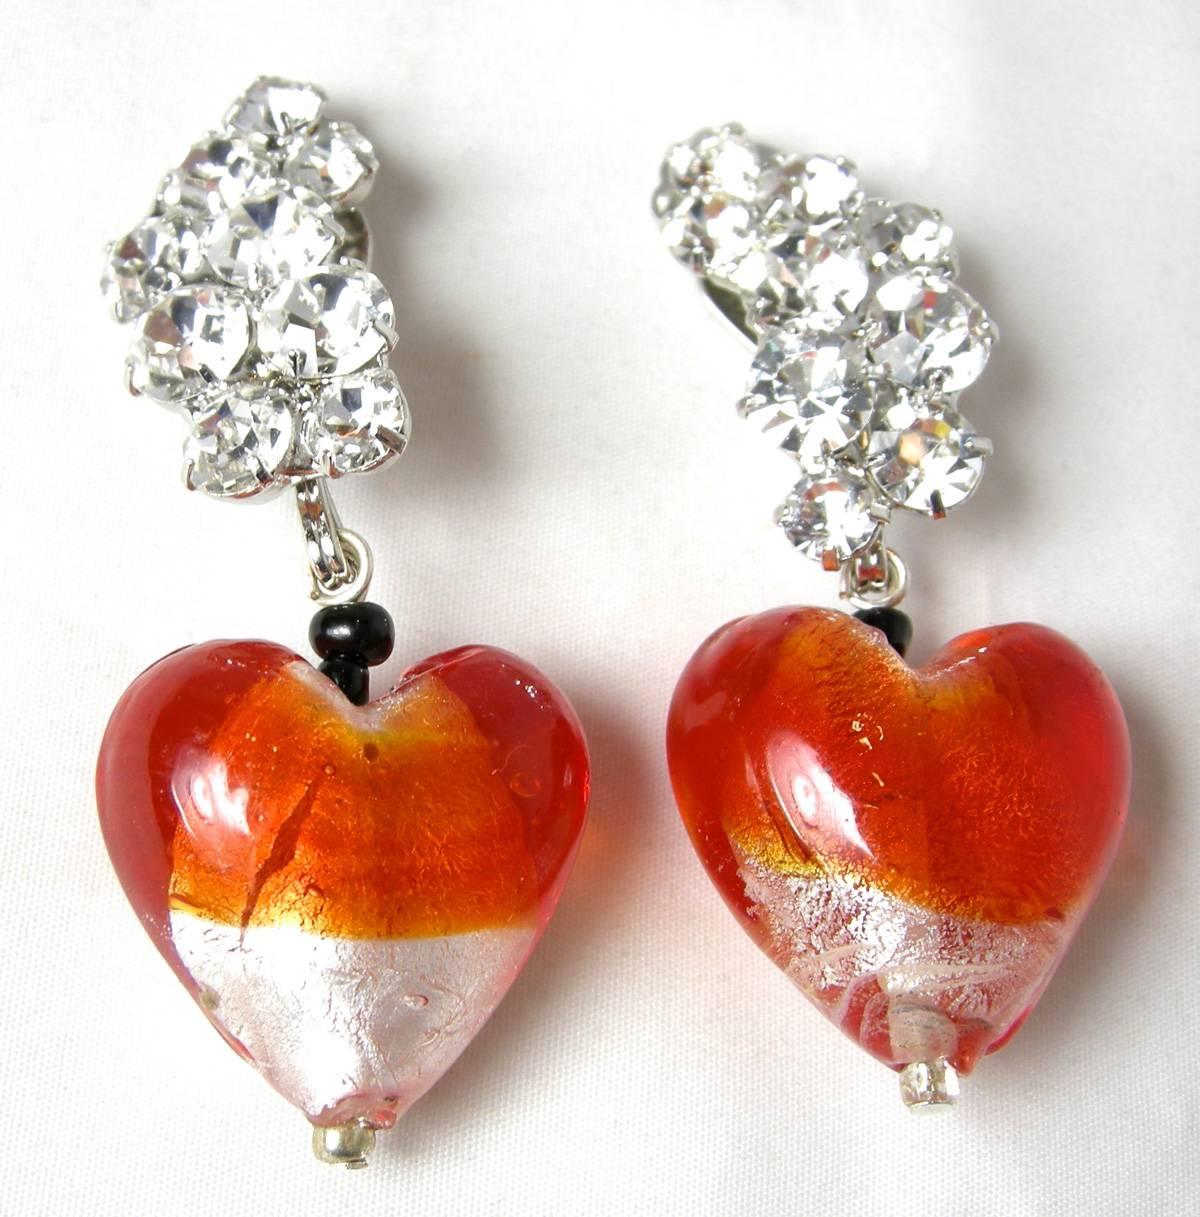 These wonderful heart shaped clip earrings by Robert Sorrell are very feminine.  They have a rhinestone cluster that extends down to an orange and clear hand blown heart shaped glass drops. Each heart is slightly different since each one is hand